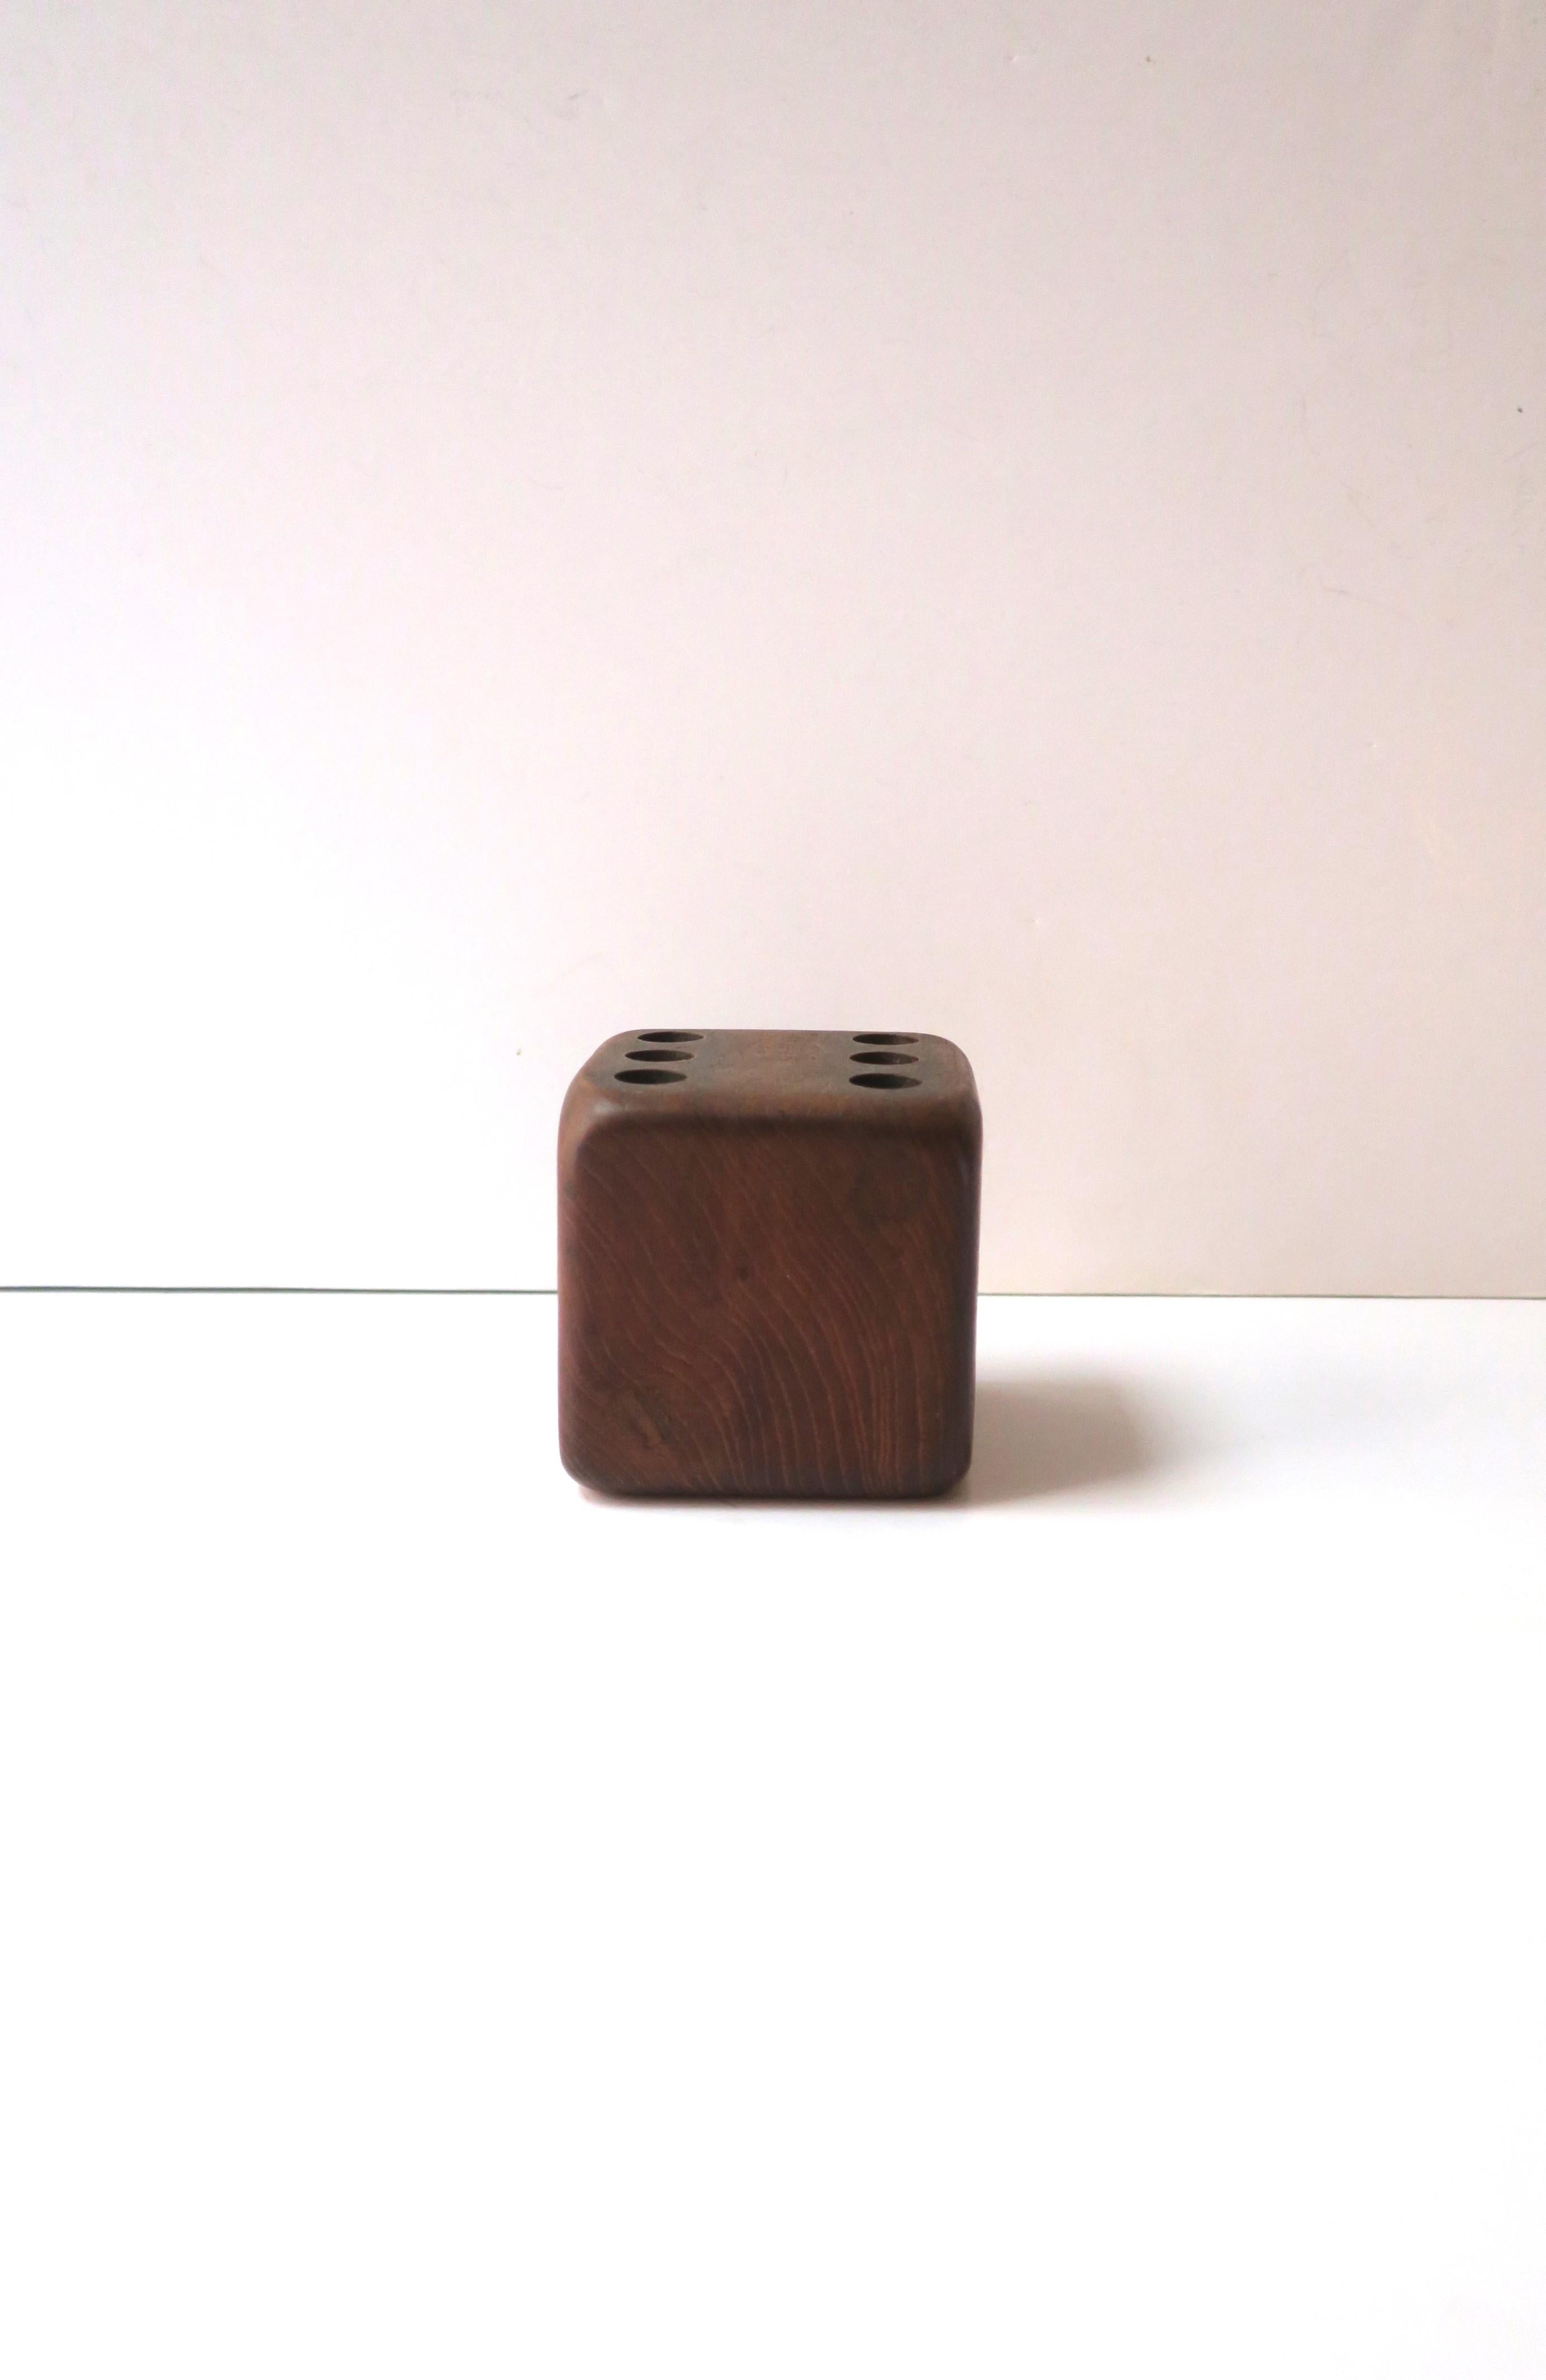 Midcentury Modern Pen Pencil Desk Holder Wood Dice from Sweden In Good Condition For Sale In New York, NY